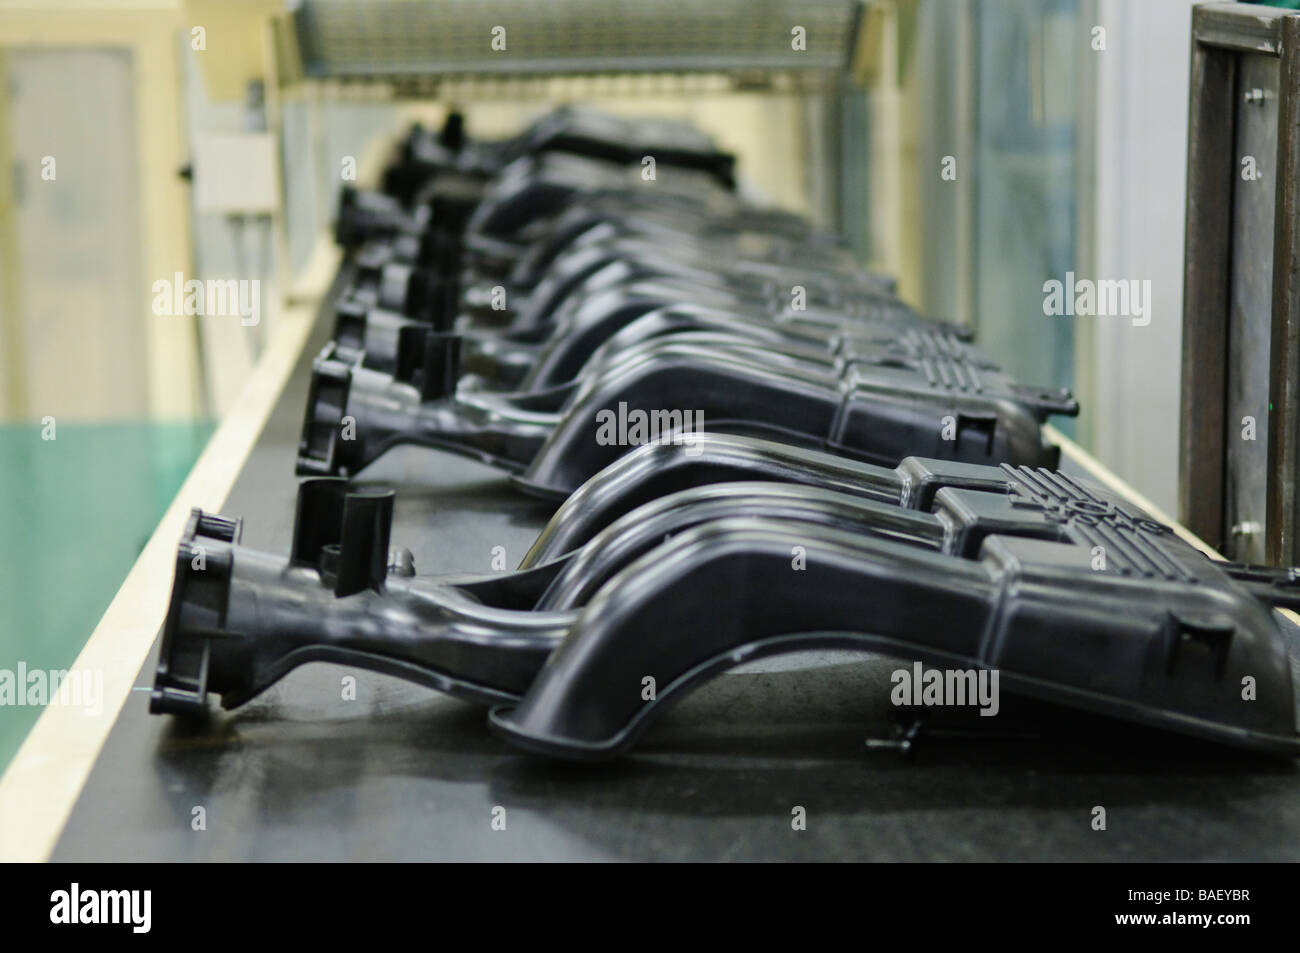 Inlet manifolds for Ford 4.0L SOHC engines on a production line Stock Photo